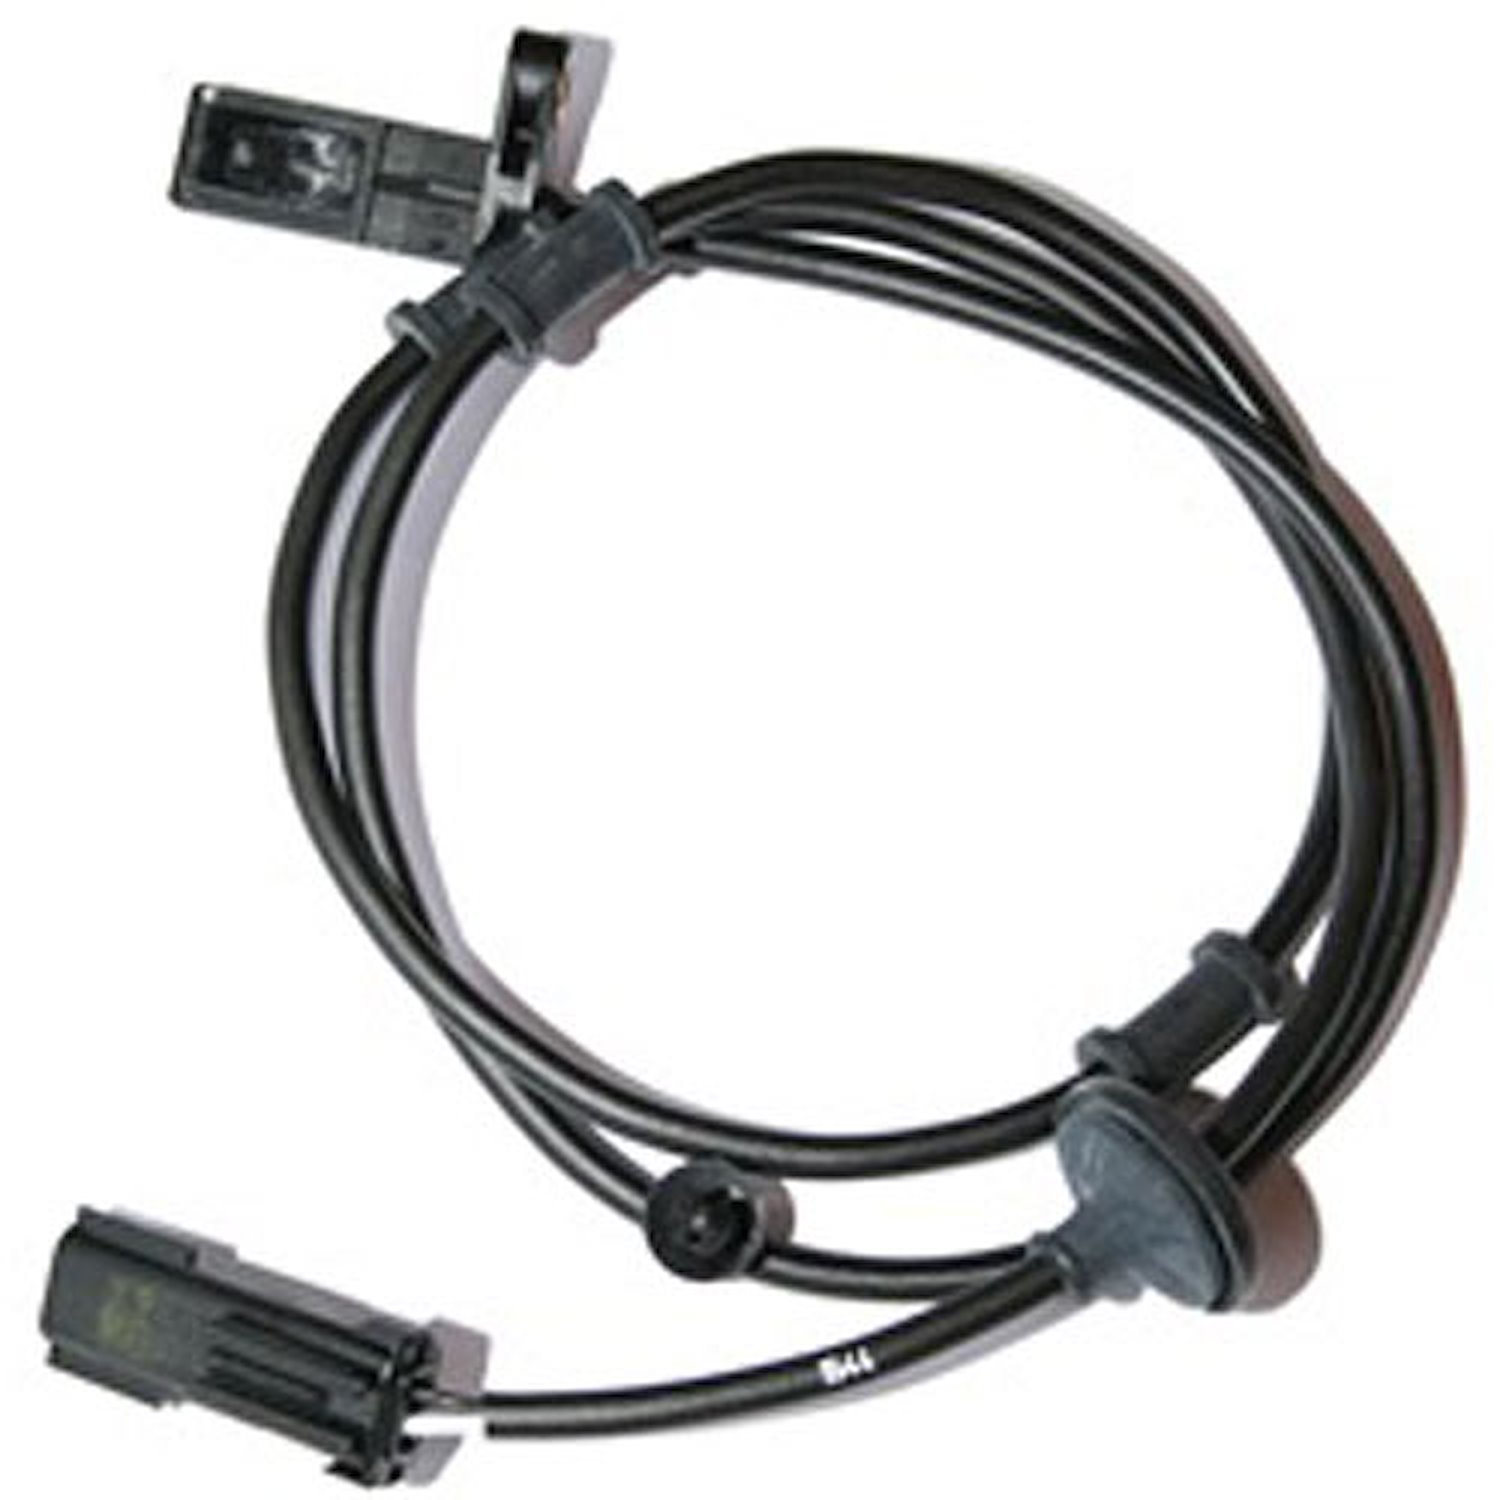 This front ABS Speed Sensor from Omix-ADA fits the left or right side on 07-10 Jeep Wrangler.